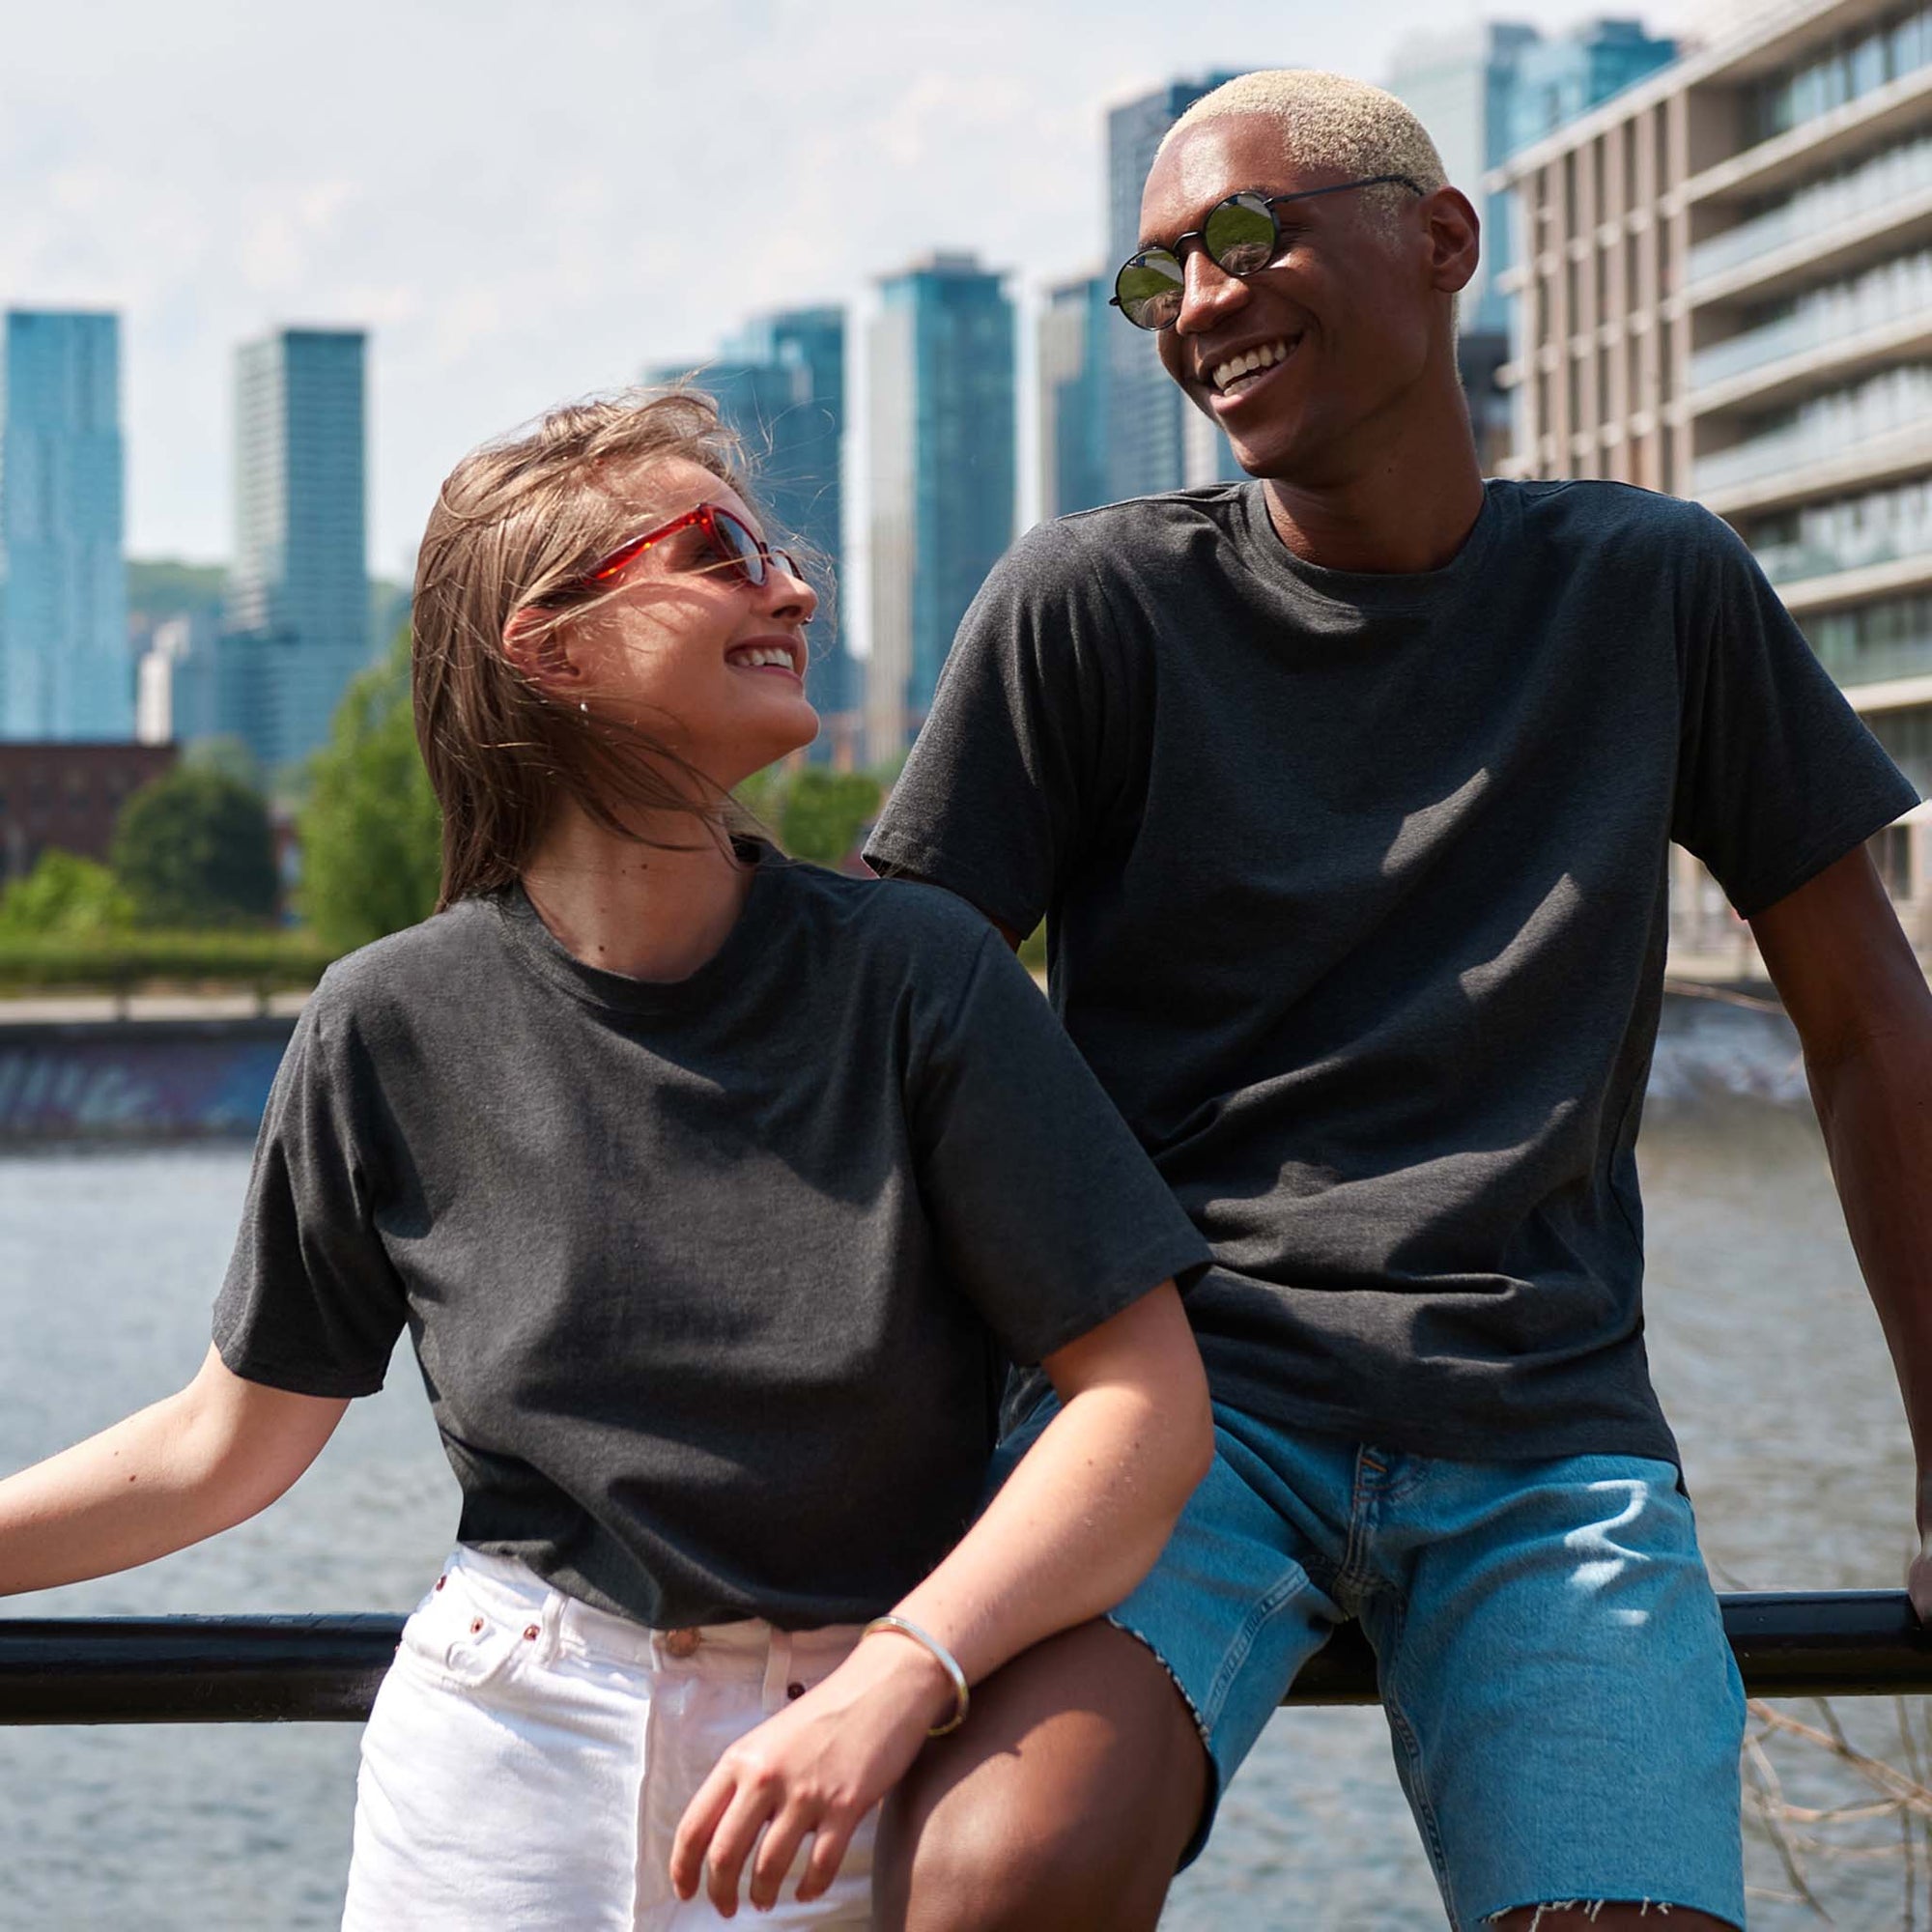 A man and woman in grey t-shirts looking at each other with a city background